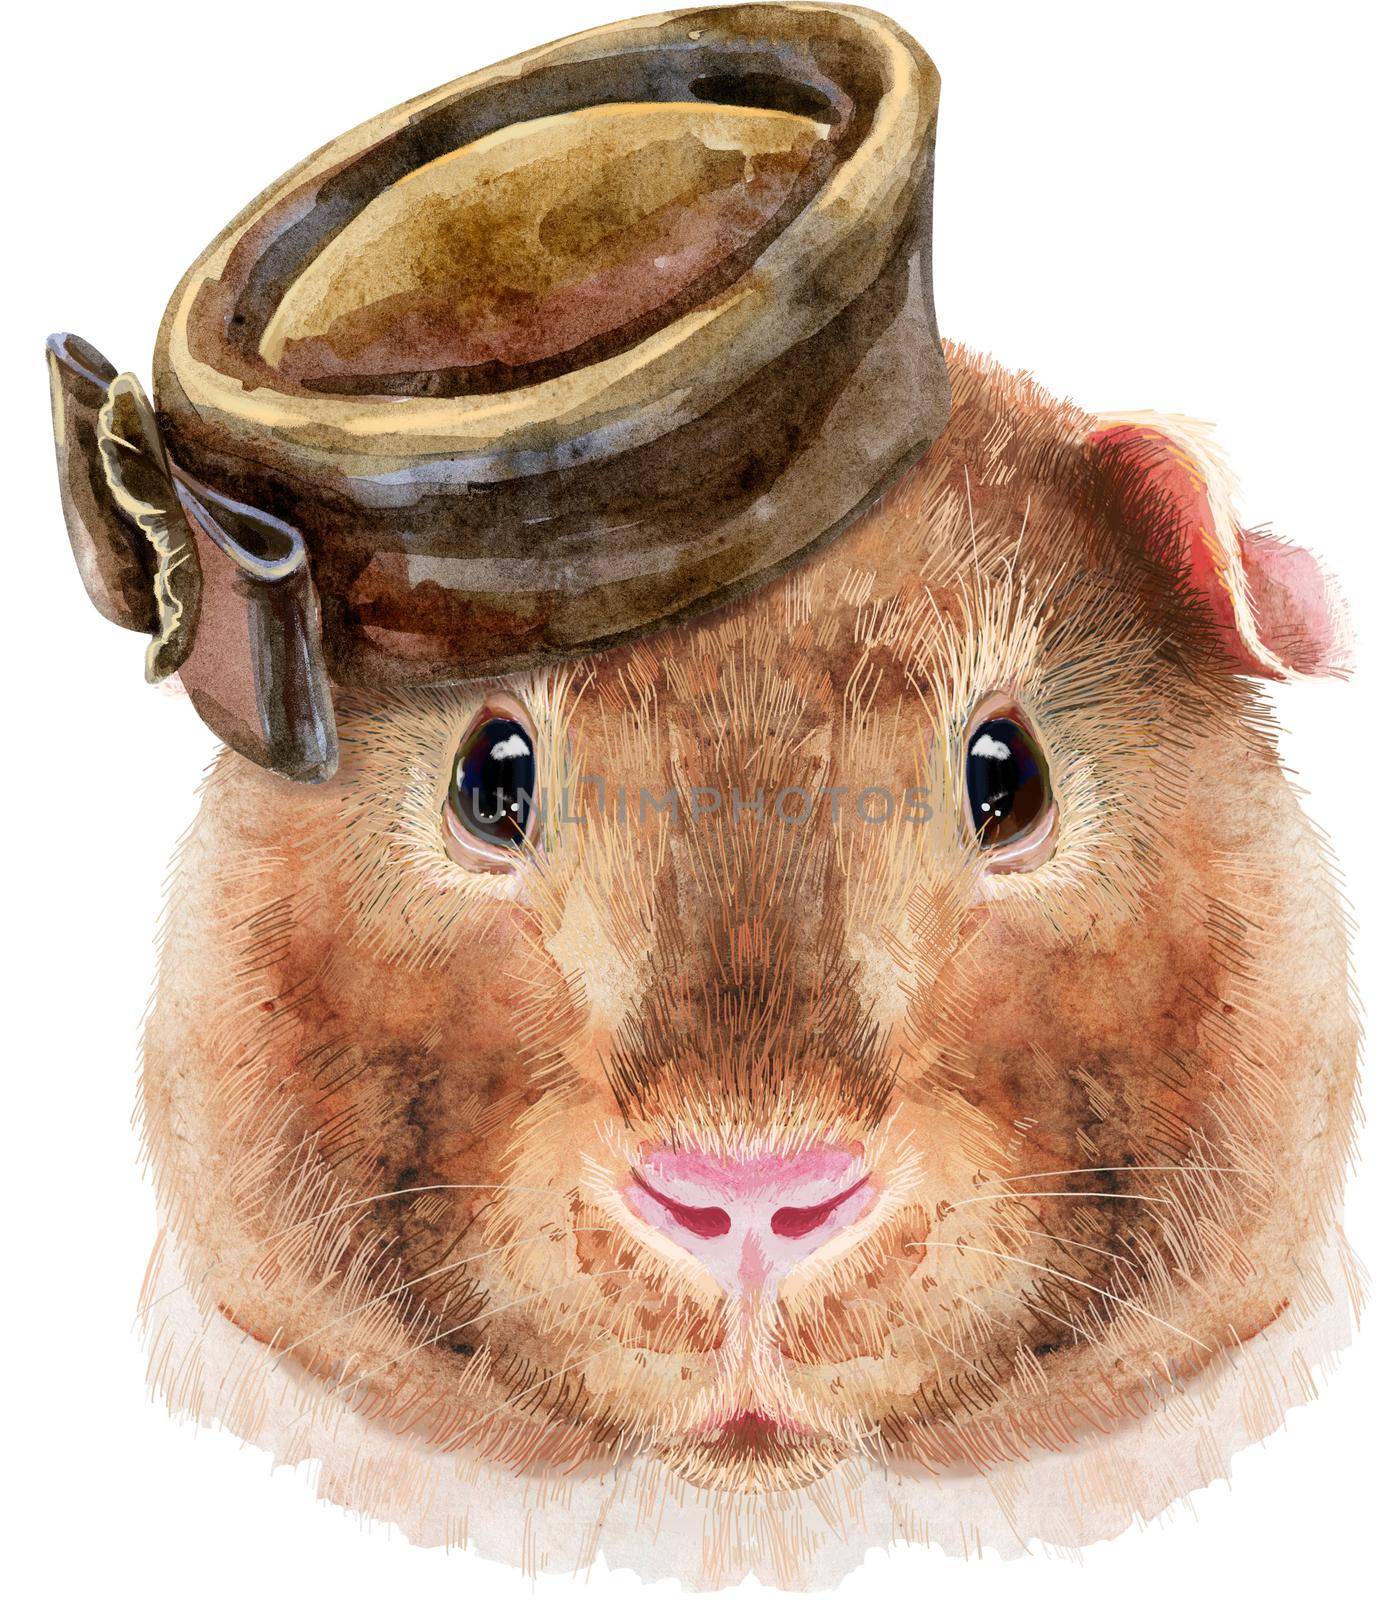 Watercolor portrait of Teddy guinea pig with brown hat on white background by NataOmsk